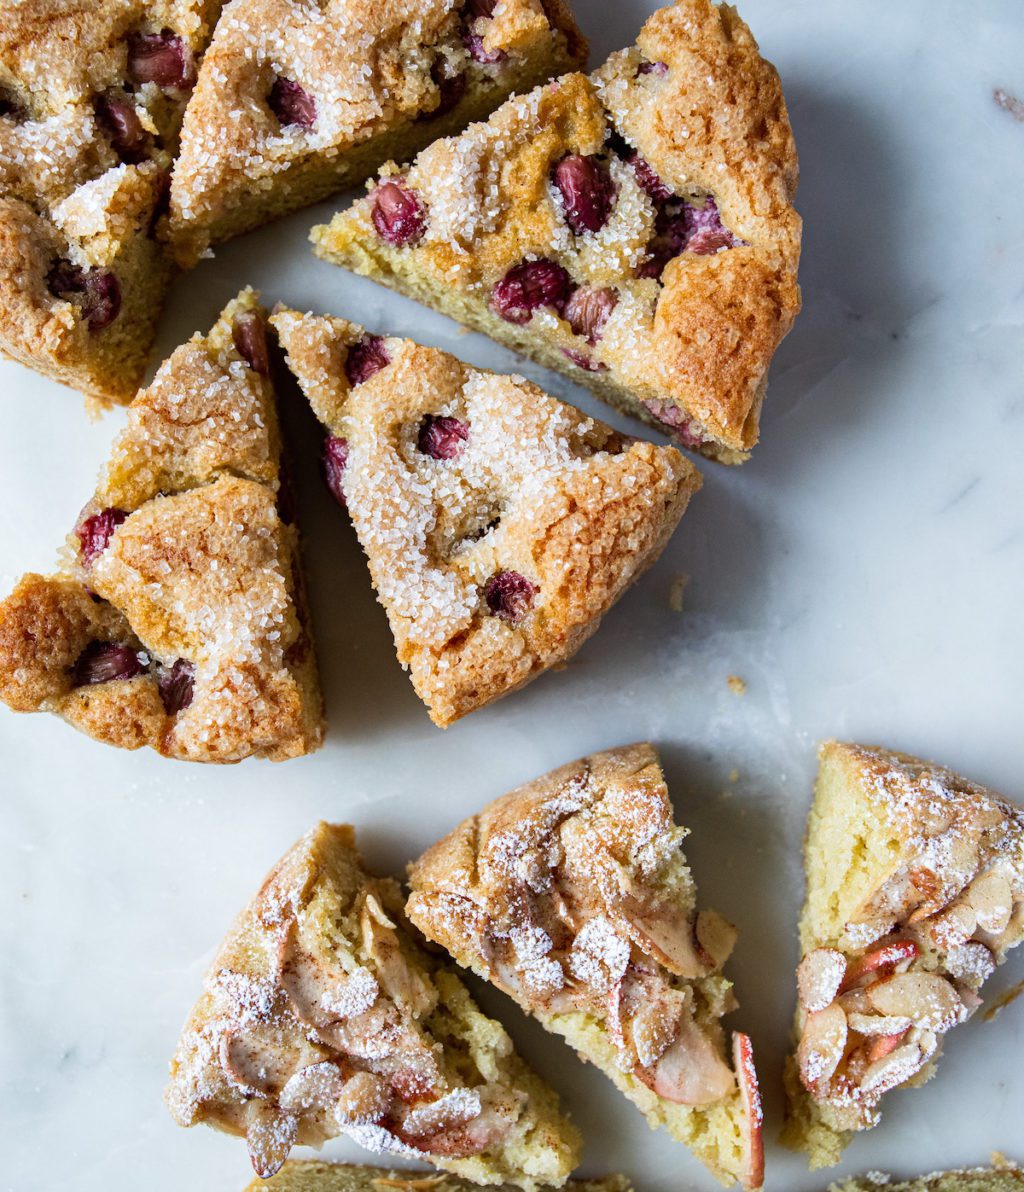 slices of grape and apple cake